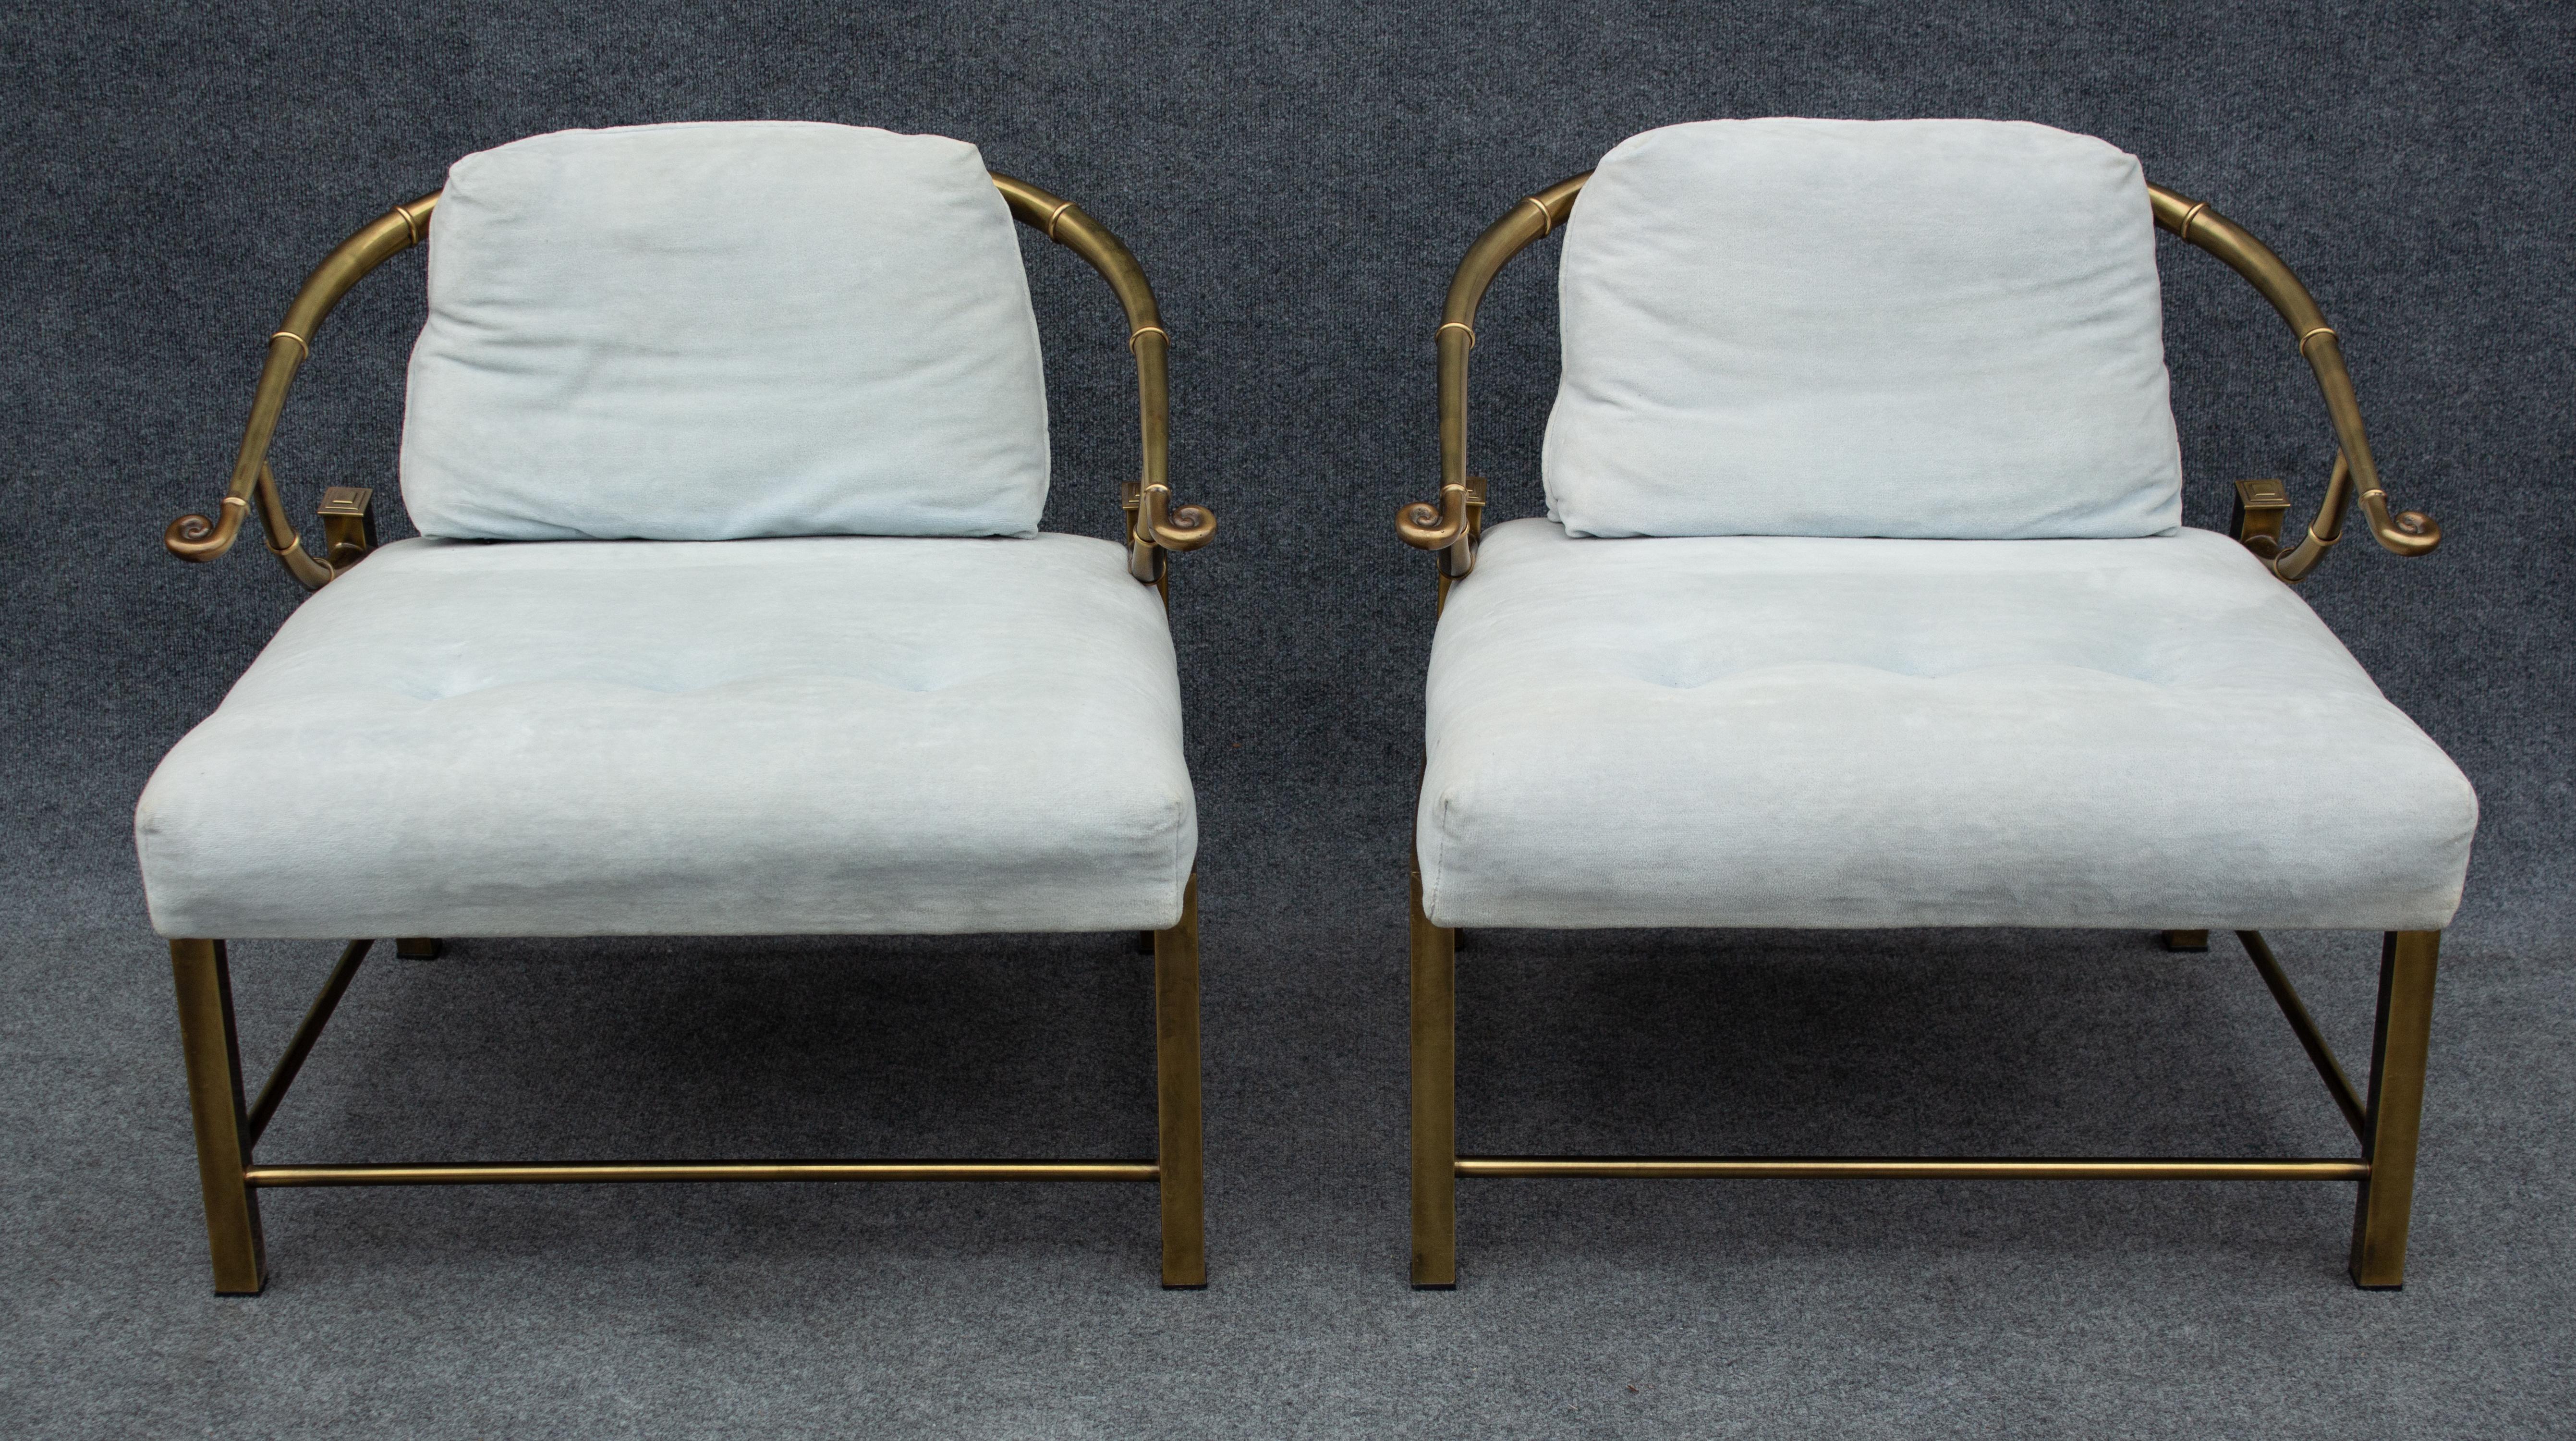 Designed by Warren Lloyd, these chairs were manufactured in Italy by Mastercraft, famous now for their extremely high construction quality and various brass piece. These chairs are constructed of brass plated steel, and feature a marriage of design